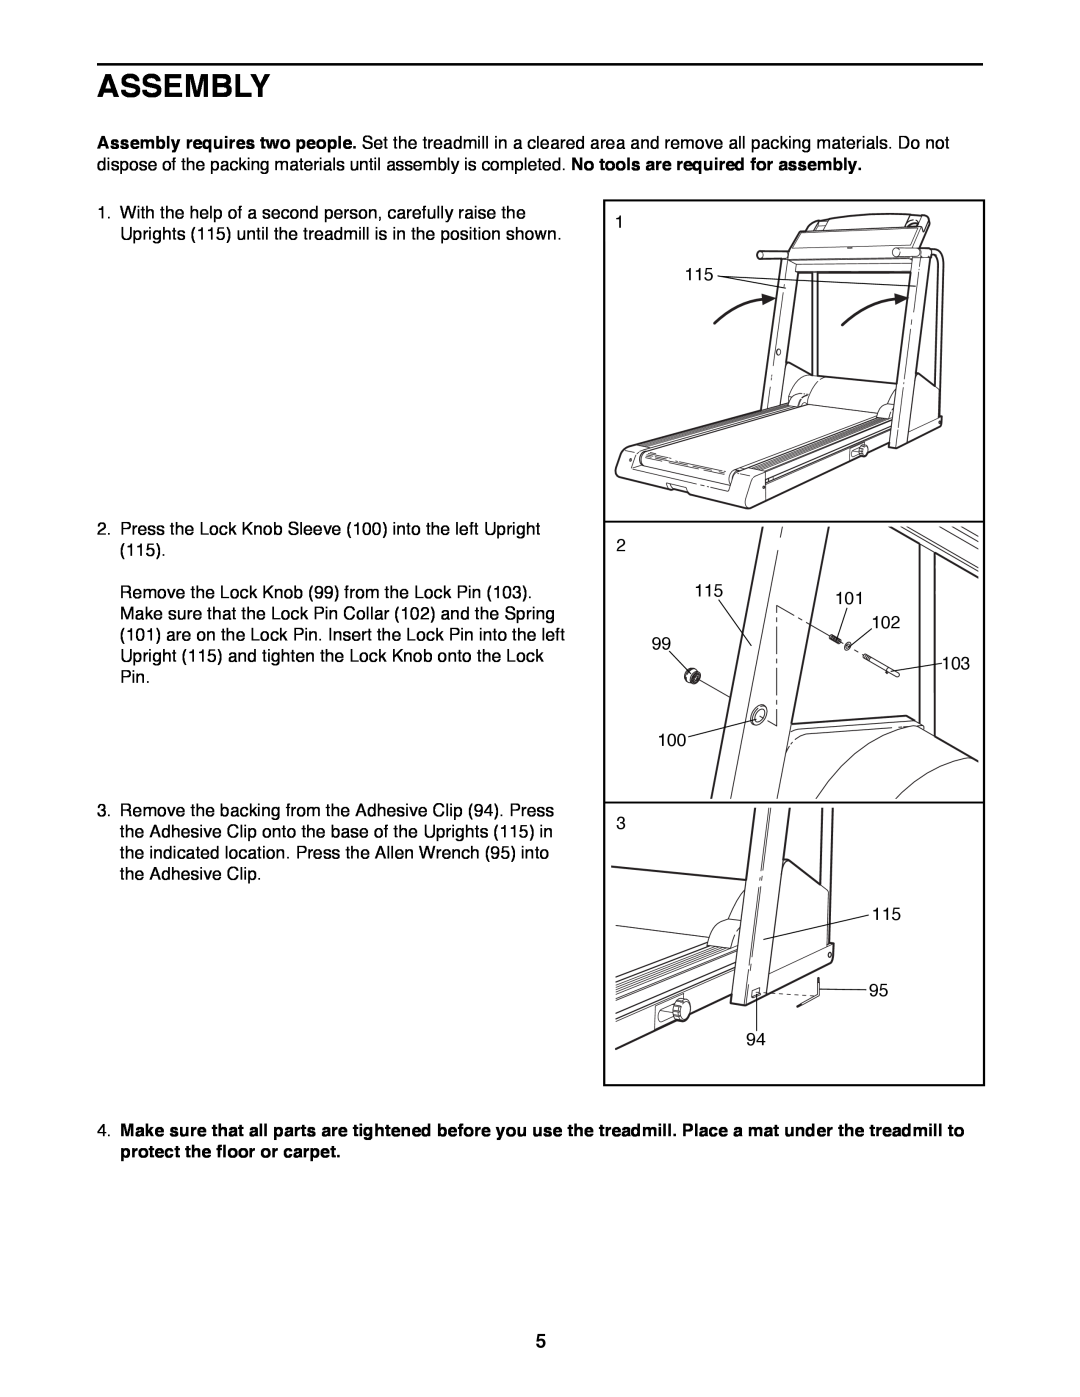 Image 831.297572 user manual Assembly 